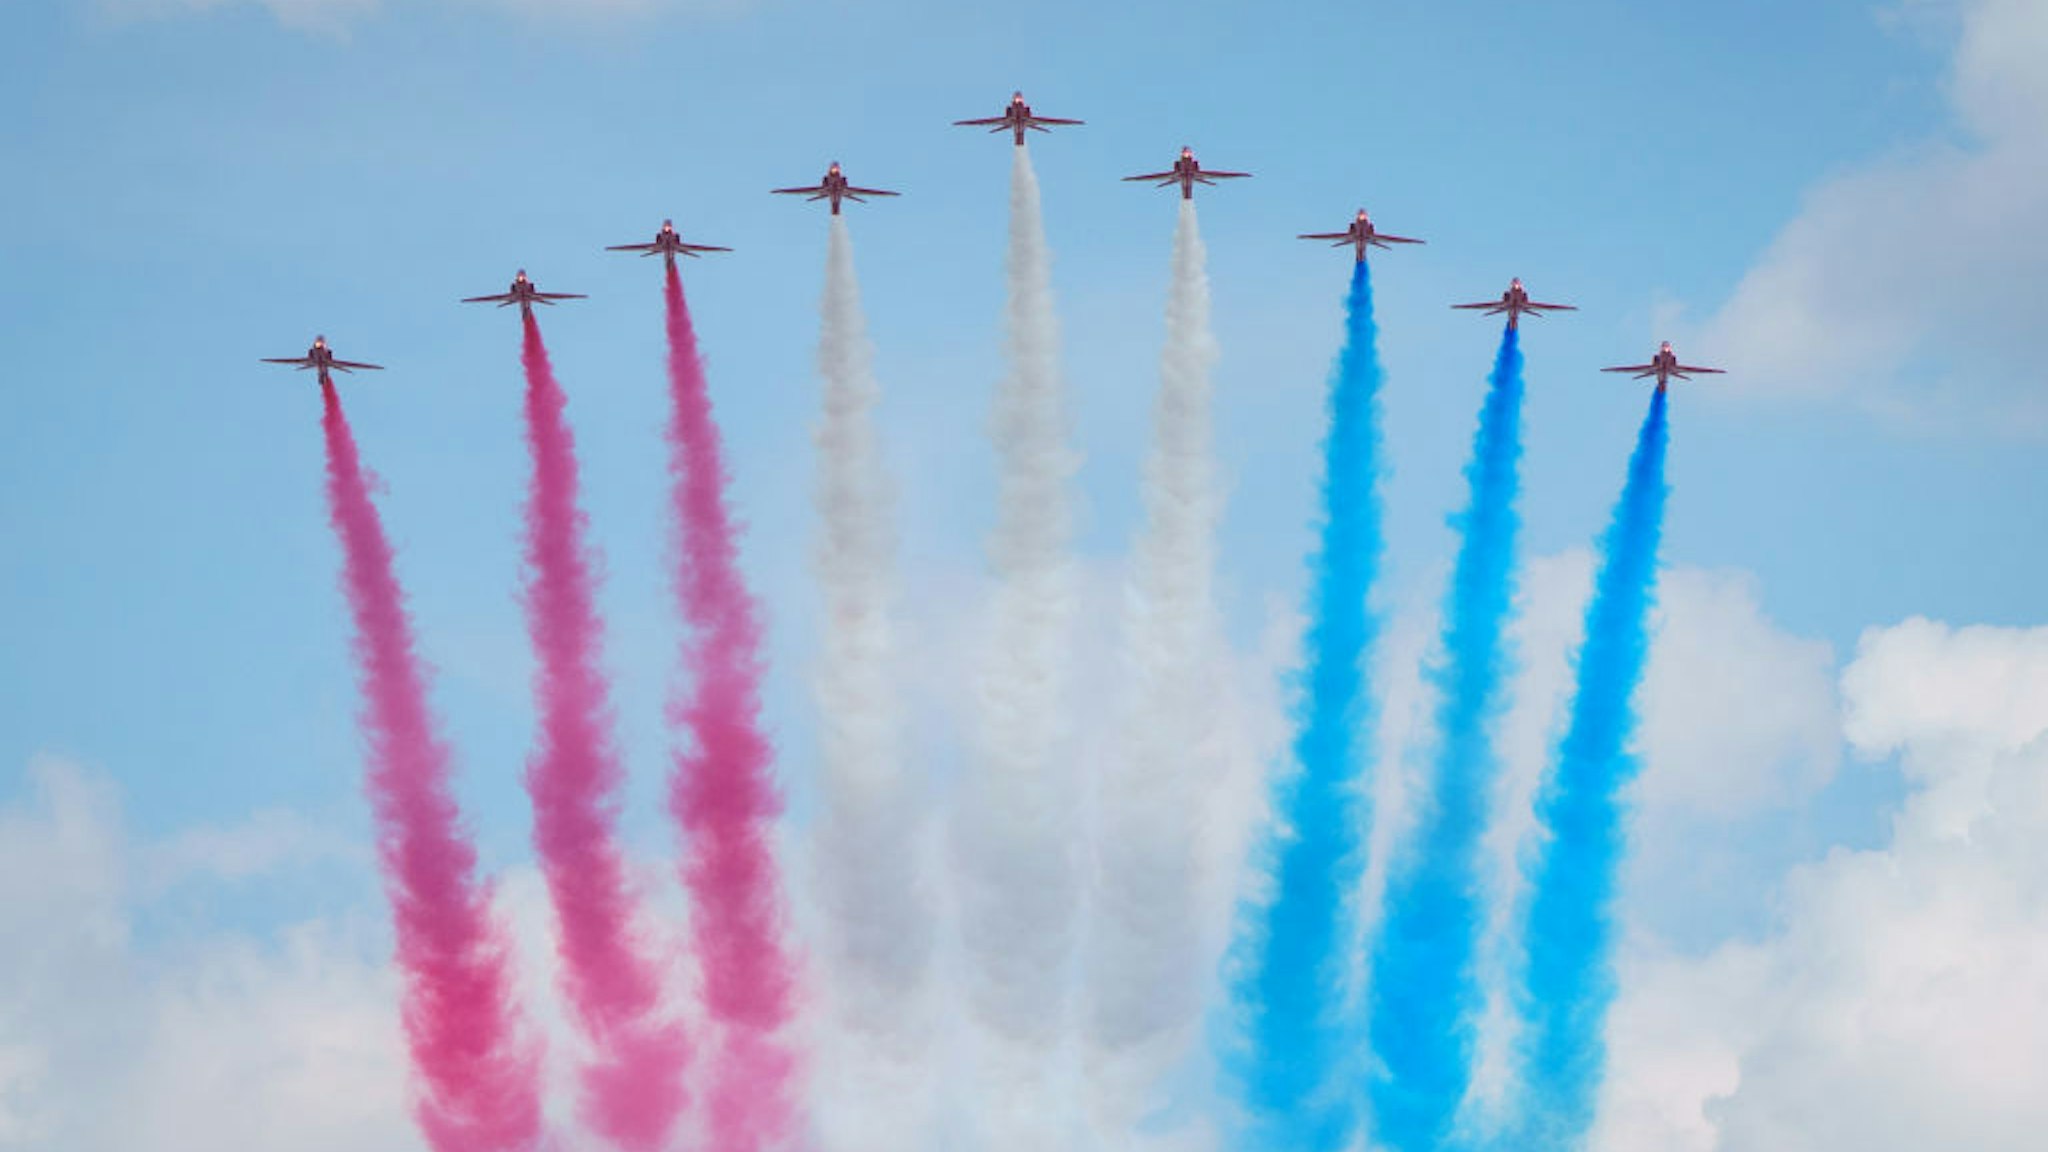 The Red Arrows during a flypast at the conclusion of the Trooping the Colour ceremony at Horse Guards Parade, central London, as the Queen celebrates her official birthday, on day one of the Platinum Jubilee celebrations.